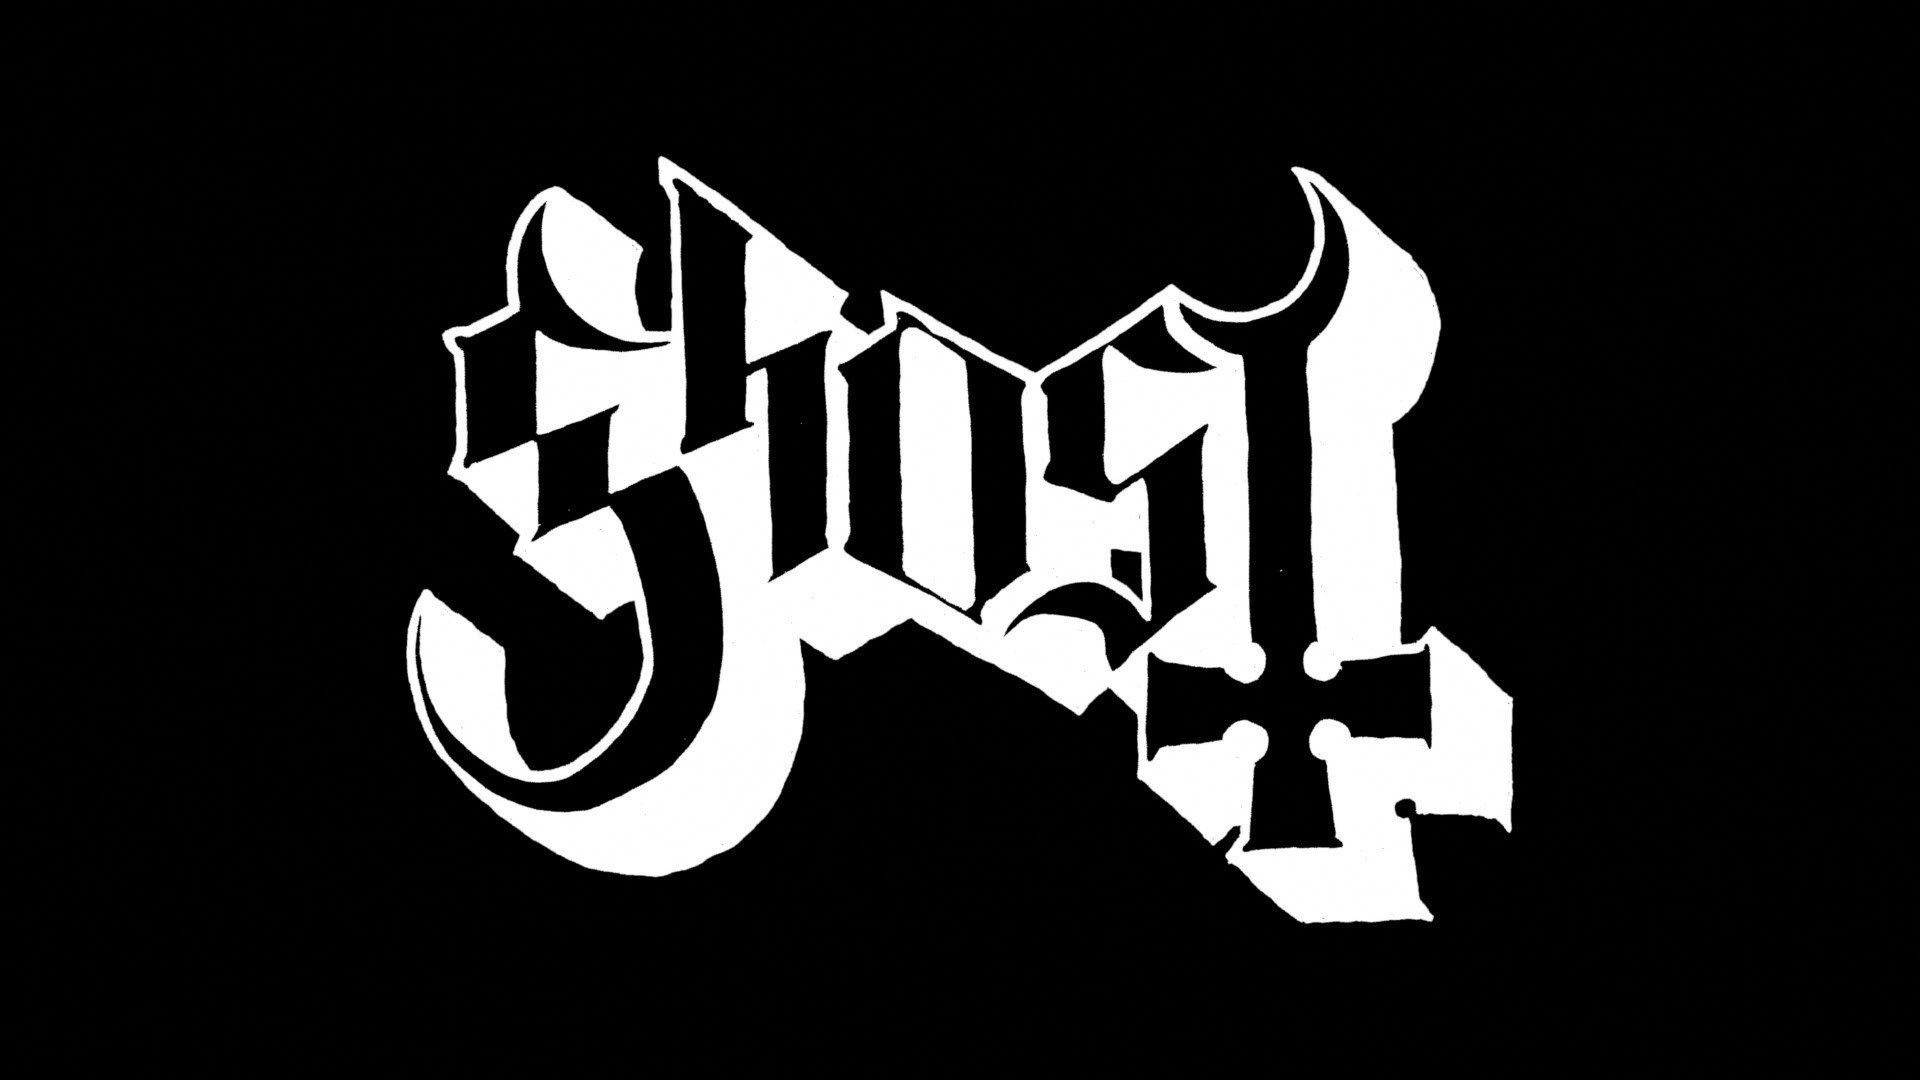 GosT Band Wallpaper Free GosT Band Background